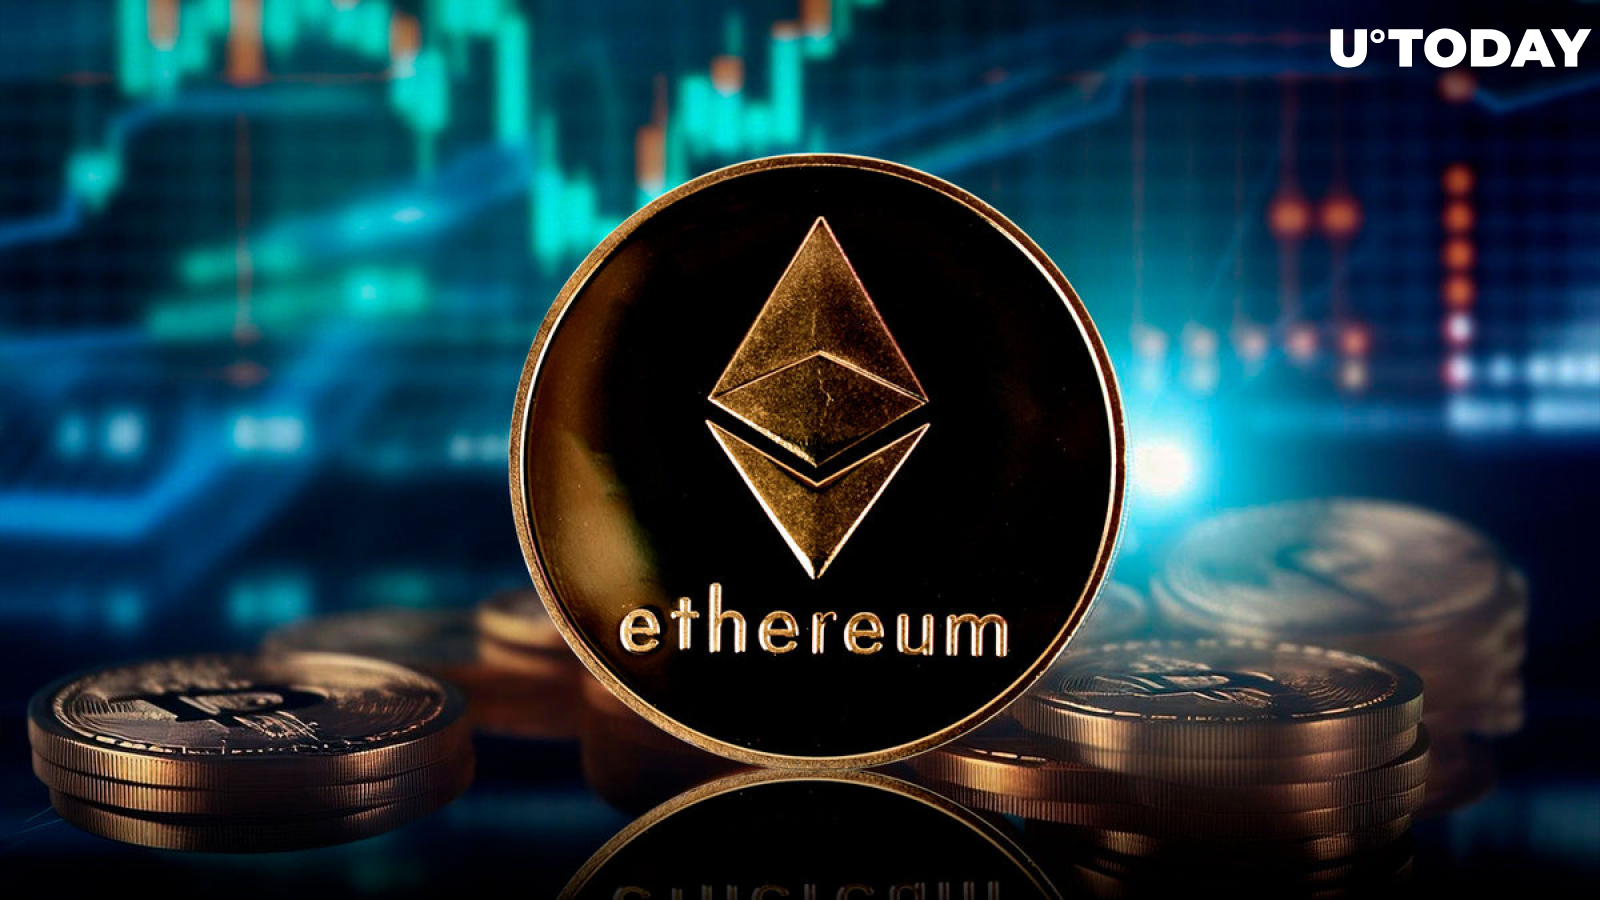  Here's When Ethereum Likely to Break Out, Analyst Says